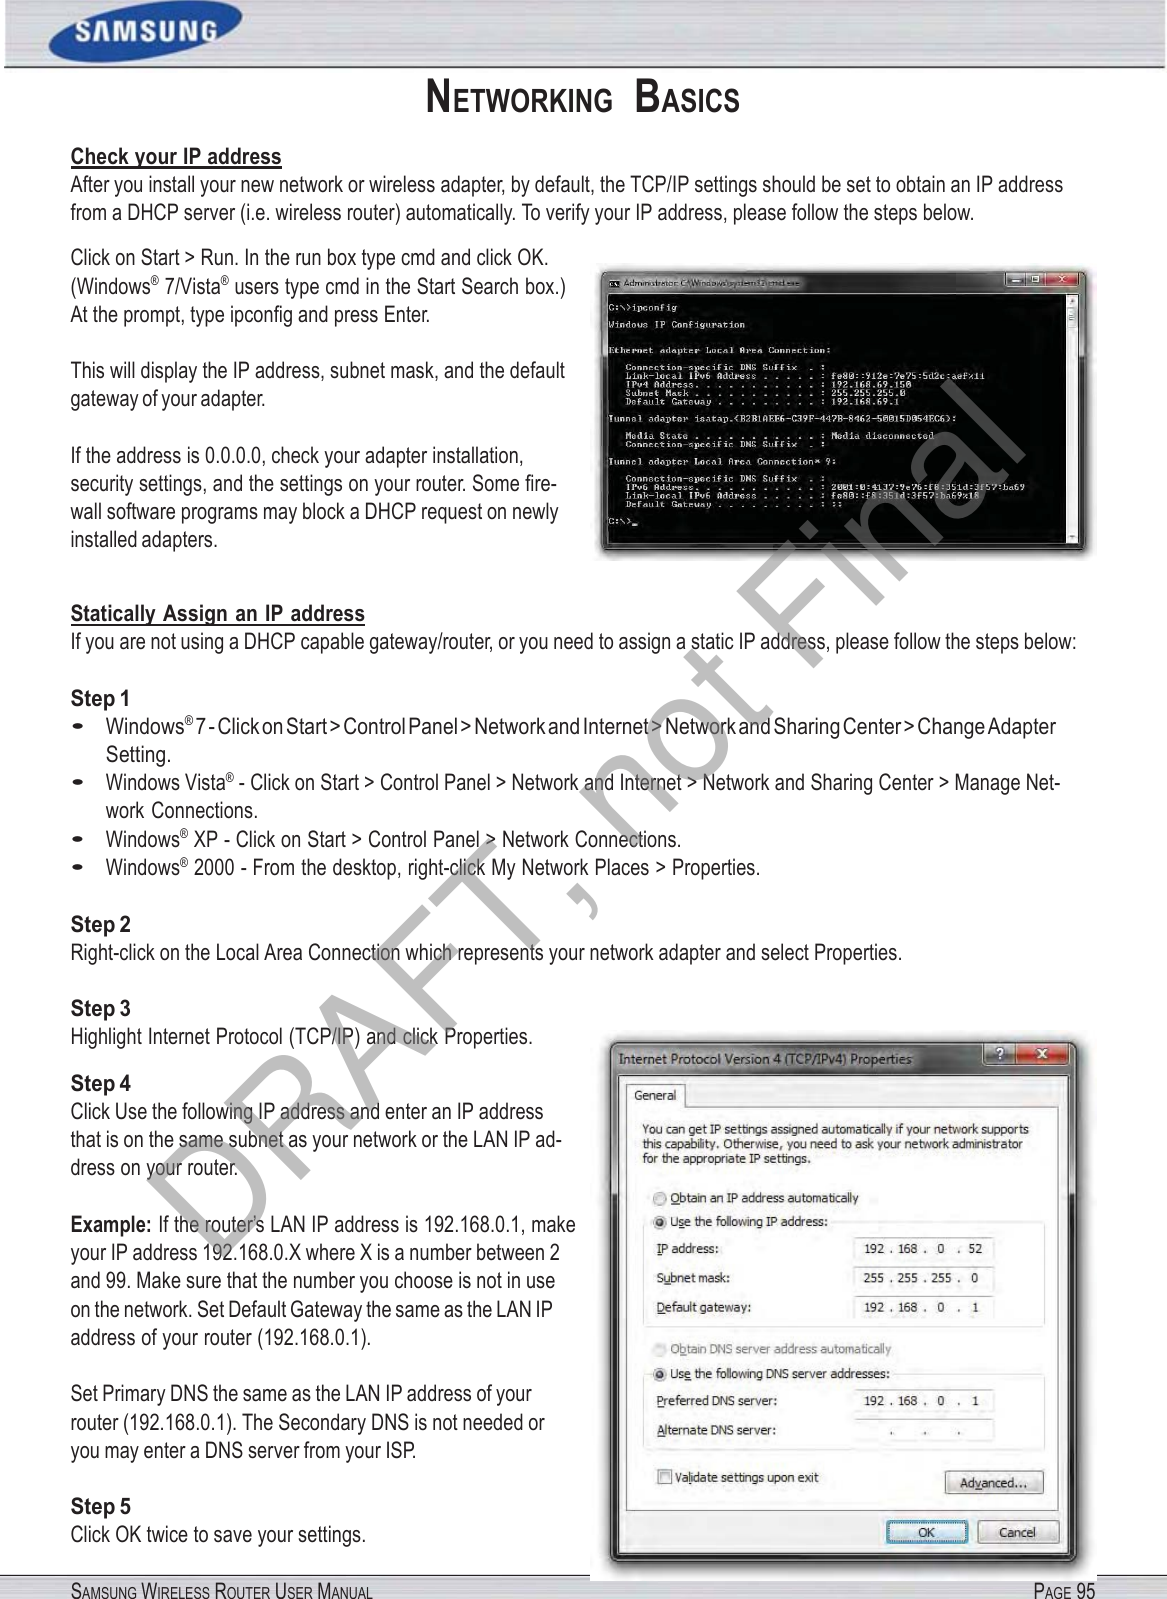 SAMSUNG WIRELESS ROUTER USER MANUAL PAGE 95NETWORKING  BASICS Check your IP address After you install your new network or wireless adapter, by default, the TCP/IP settings should be set to obtain an IP address from a DHCP server (i.e. wireless router) automatically. To verify your IP address, please follow the steps below. Click on Start &gt; Run. In the run box type cmd and click OK. (Windows® 7/Vista® users type cmd in the Start Search box.) At the prompt, type ipconﬁg and press Enter. This will display the IP address, subnet mask, and the default gateway of your adapter. If the address is 0.0.0.0, check your adapter installation, security settings, and the settings on your router. Some ﬁre- wall software programs may block a DHCP request on newly installed adapters. Statically Assign an IP address If you are not using a DHCP capable gateway/router, or you need to assign a static IP address, please follow the steps below: Step 1 • Windows® 7 - Click on Start &gt; Control Panel &gt; Network and Internet &gt; Network and Sharing Center &gt; Change Adapter Setting. • Windows Vista® - Click on Start &gt; Control Panel &gt; Network and Internet &gt; Network and Sharing Center &gt; Manage Net- work Connections. • Windows® XP - Click on Start &gt; Control Panel &gt; Network Connections. • Windows® 2000 - From the desktop, right-click My Network Places &gt; Properties. Step 2 Right-click on the Local Area Connection which represents your network adapter and select Properties. Step 3 Highlight Internet Protocol (TCP/IP) and click Properties. Step 4 Click Use the following IP address and enter an IP address that is on the same subnet as your network or the LAN IP ad- dress on your router. Example: If the router’s LAN IP address is 192.168.0.1, make your IP address 192.168.0.X where X is a number between 2 and 99. Make sure that the number you choose is not in use on the network. Set Default Gateway the same as the LAN IP address of your router (192.168.0.1). Set Primary DNS the same as the LAN IP address of your router (192.168.0.1). The Secondary DNS is not needed or you may enter a DNS server from your ISP. Step 5 Click OK twice to save your settings. DRAFT, not Final